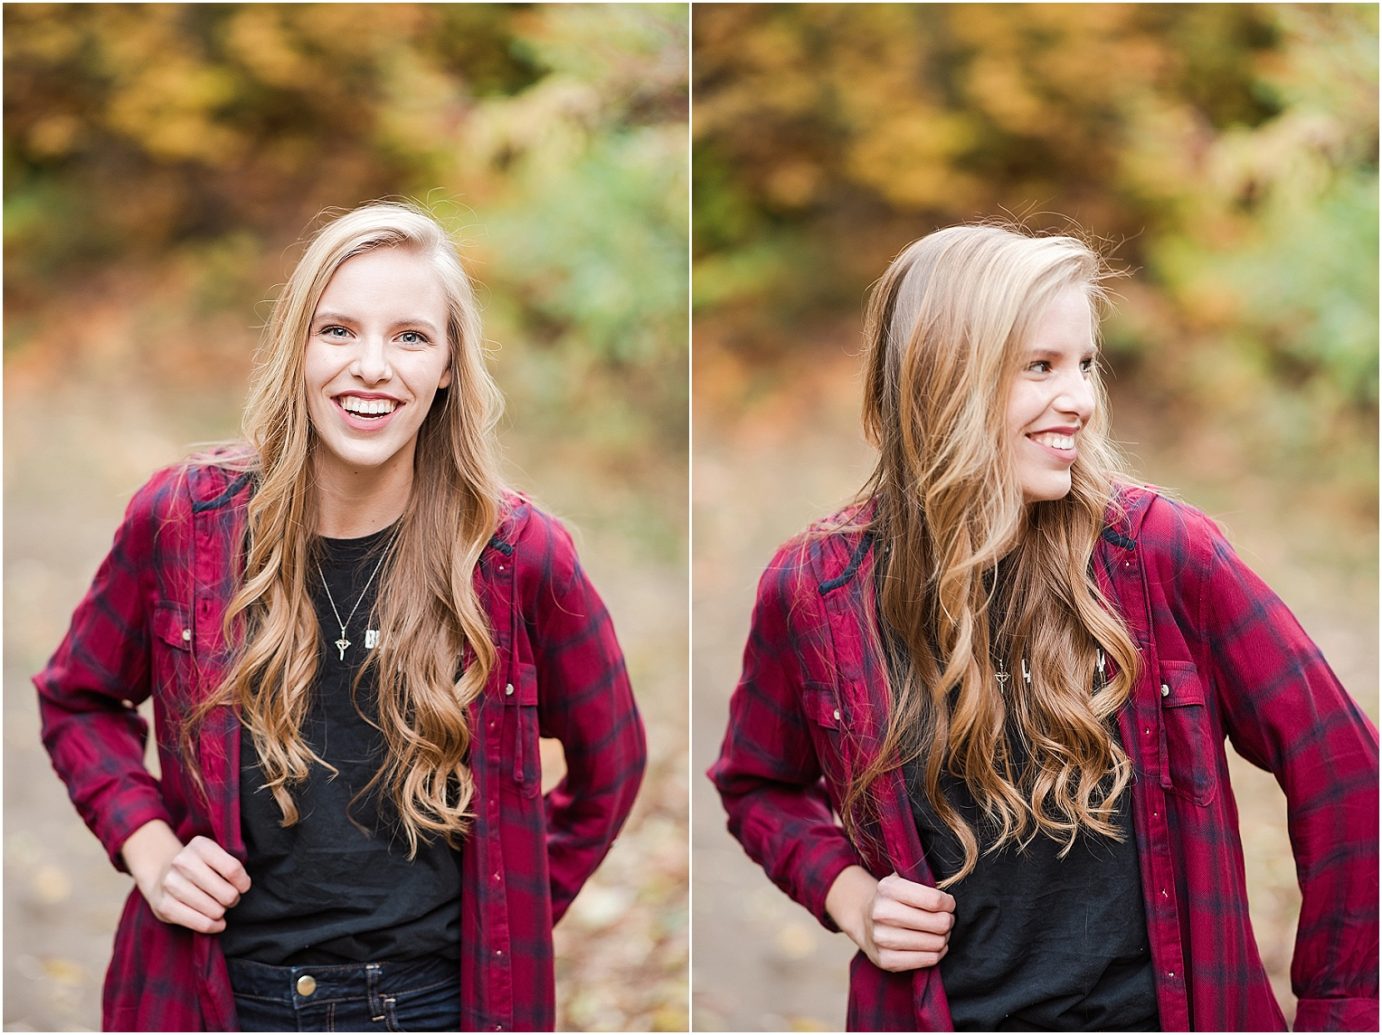 Emily Eastmont High Class of 2018 Wenatchee Photographer senior girl in fall foliage